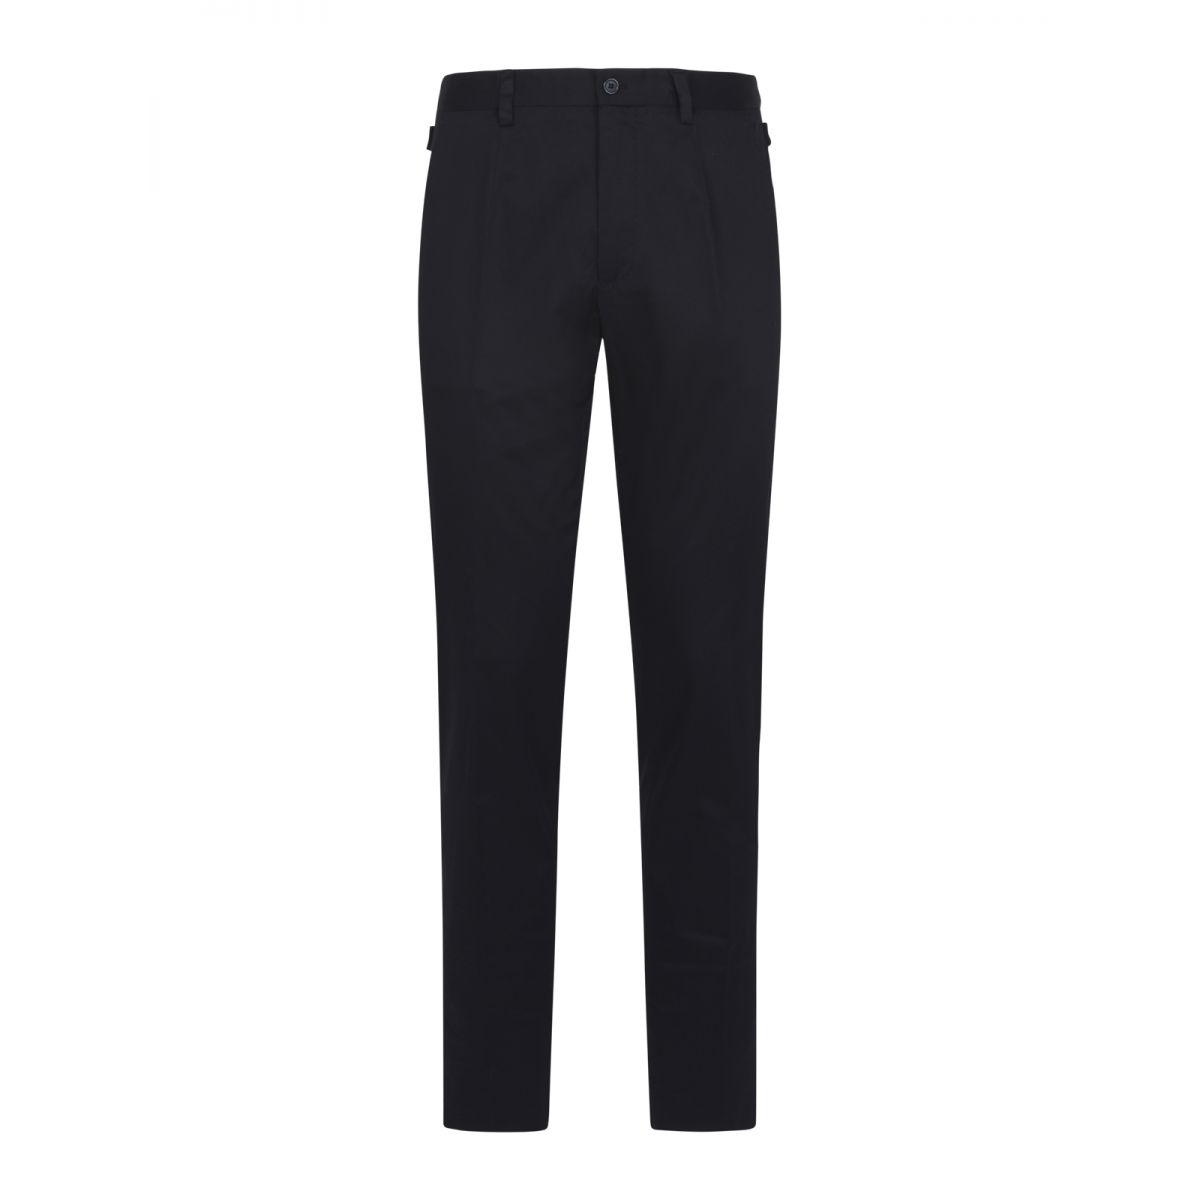 DOLCE & GABBANA - Tailored trousers